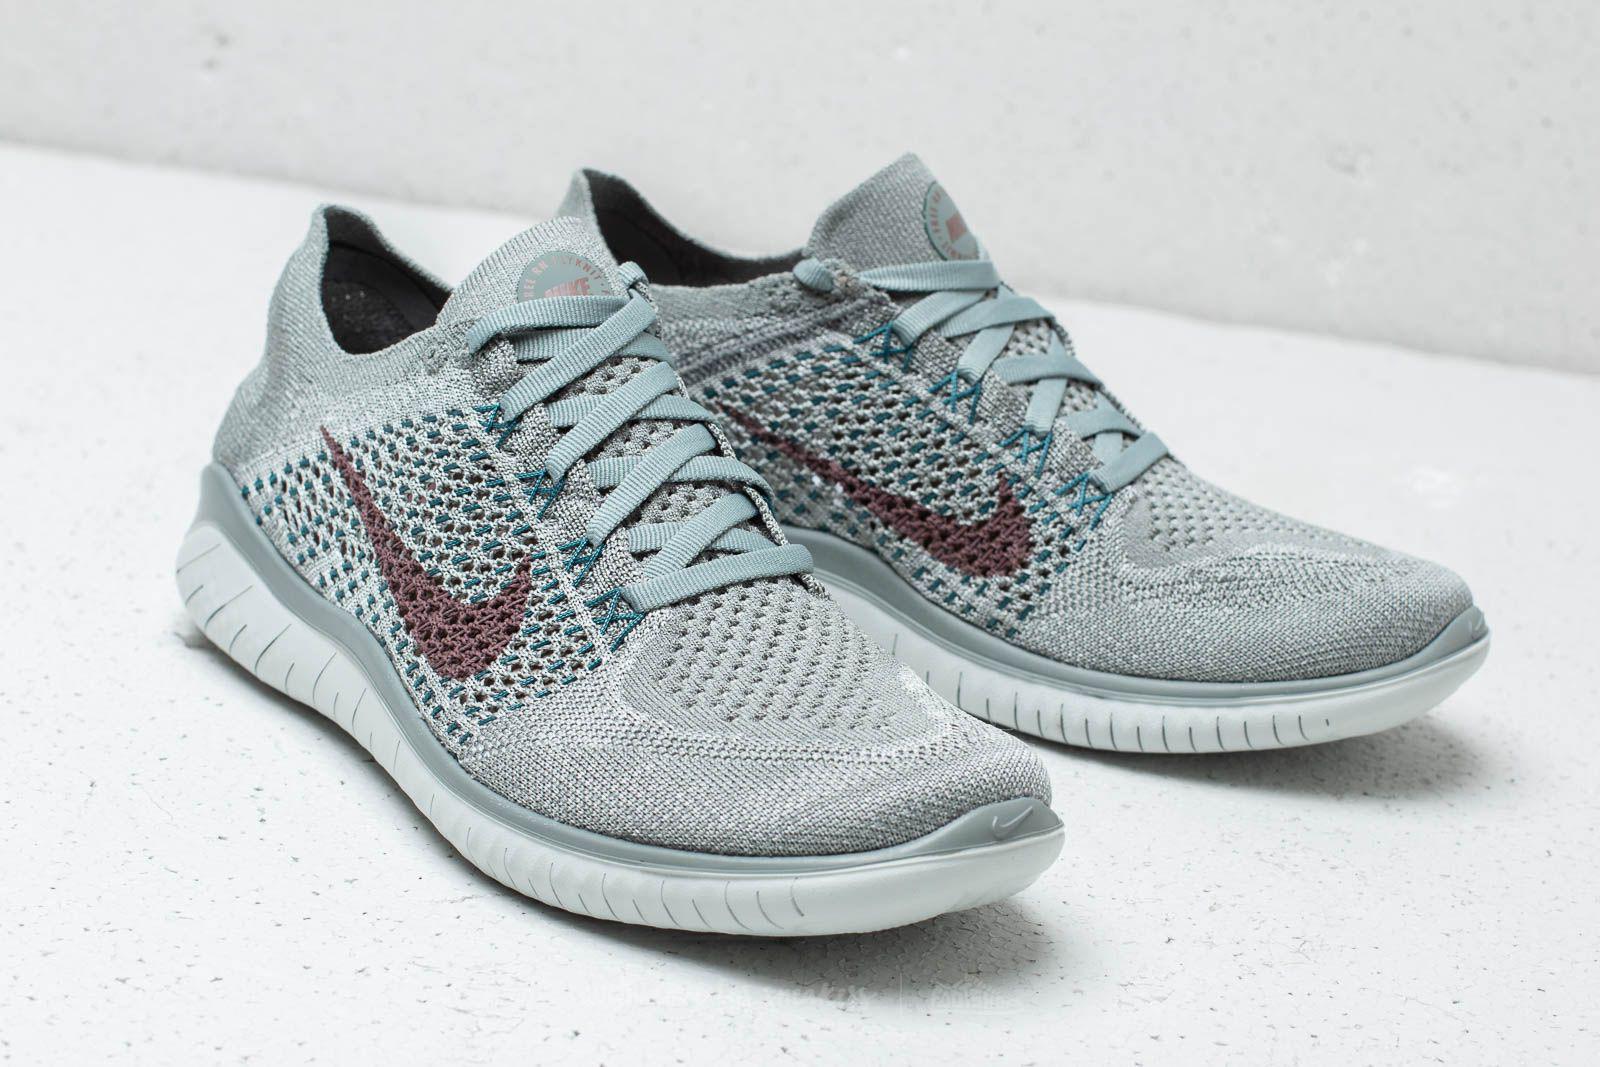 Beautiful Nike Free Rn Flyknit 2018 College Navy Squadron White 942838 400 Mens Running Shoes 942838 400